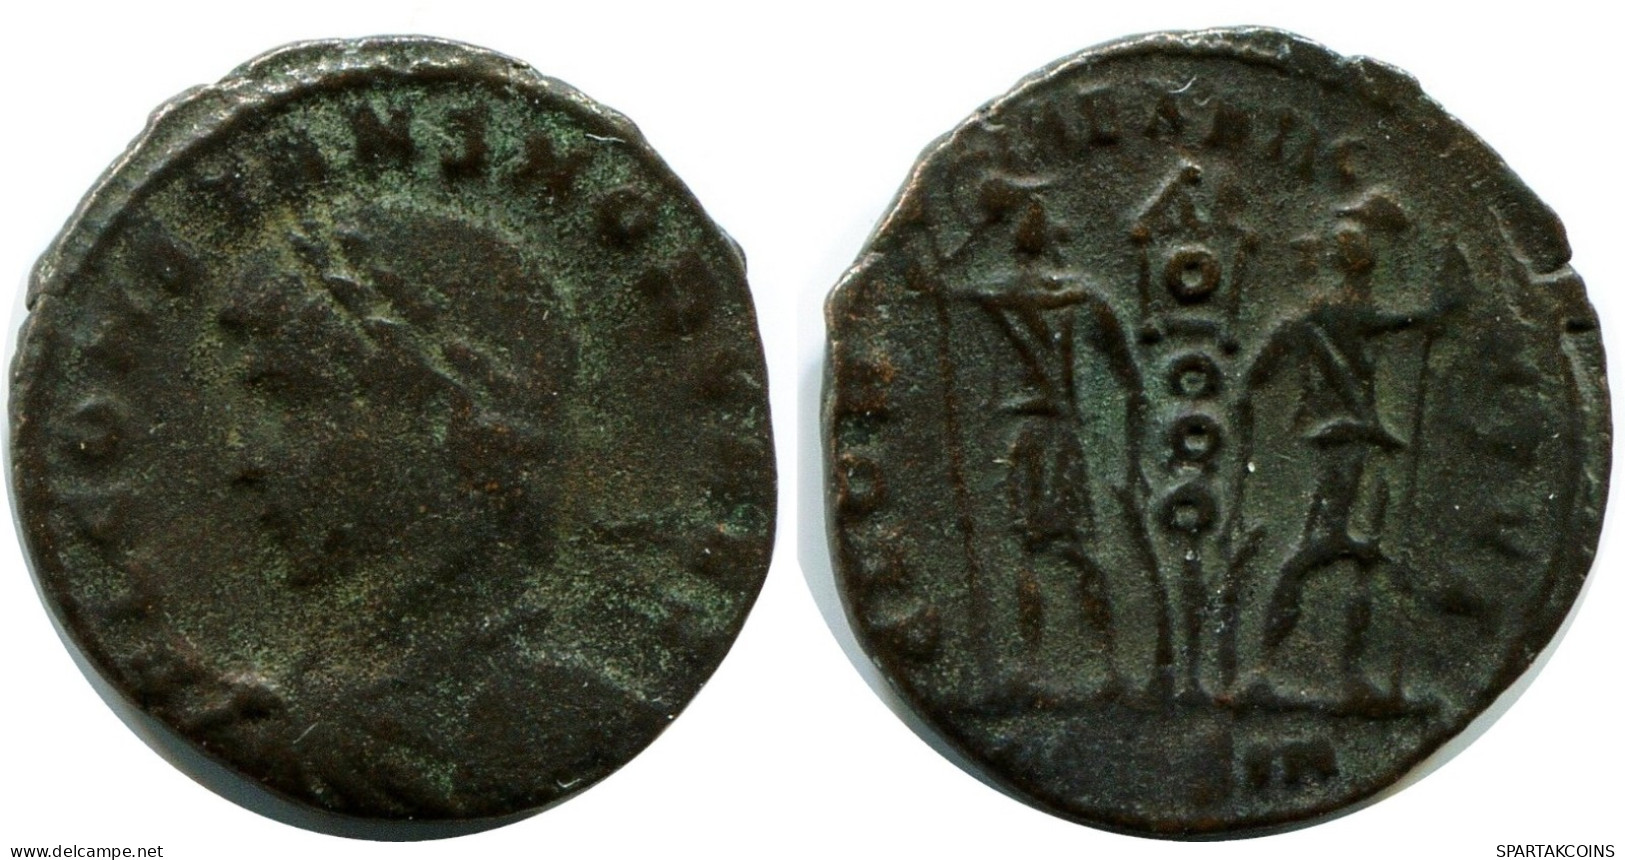 CONSTANS MINTED IN CONSTANTINOPLE FOUND IN IHNASYAH HOARD EGYPT #ANC11958.14.D.A - L'Empire Chrétien (307 à 363)